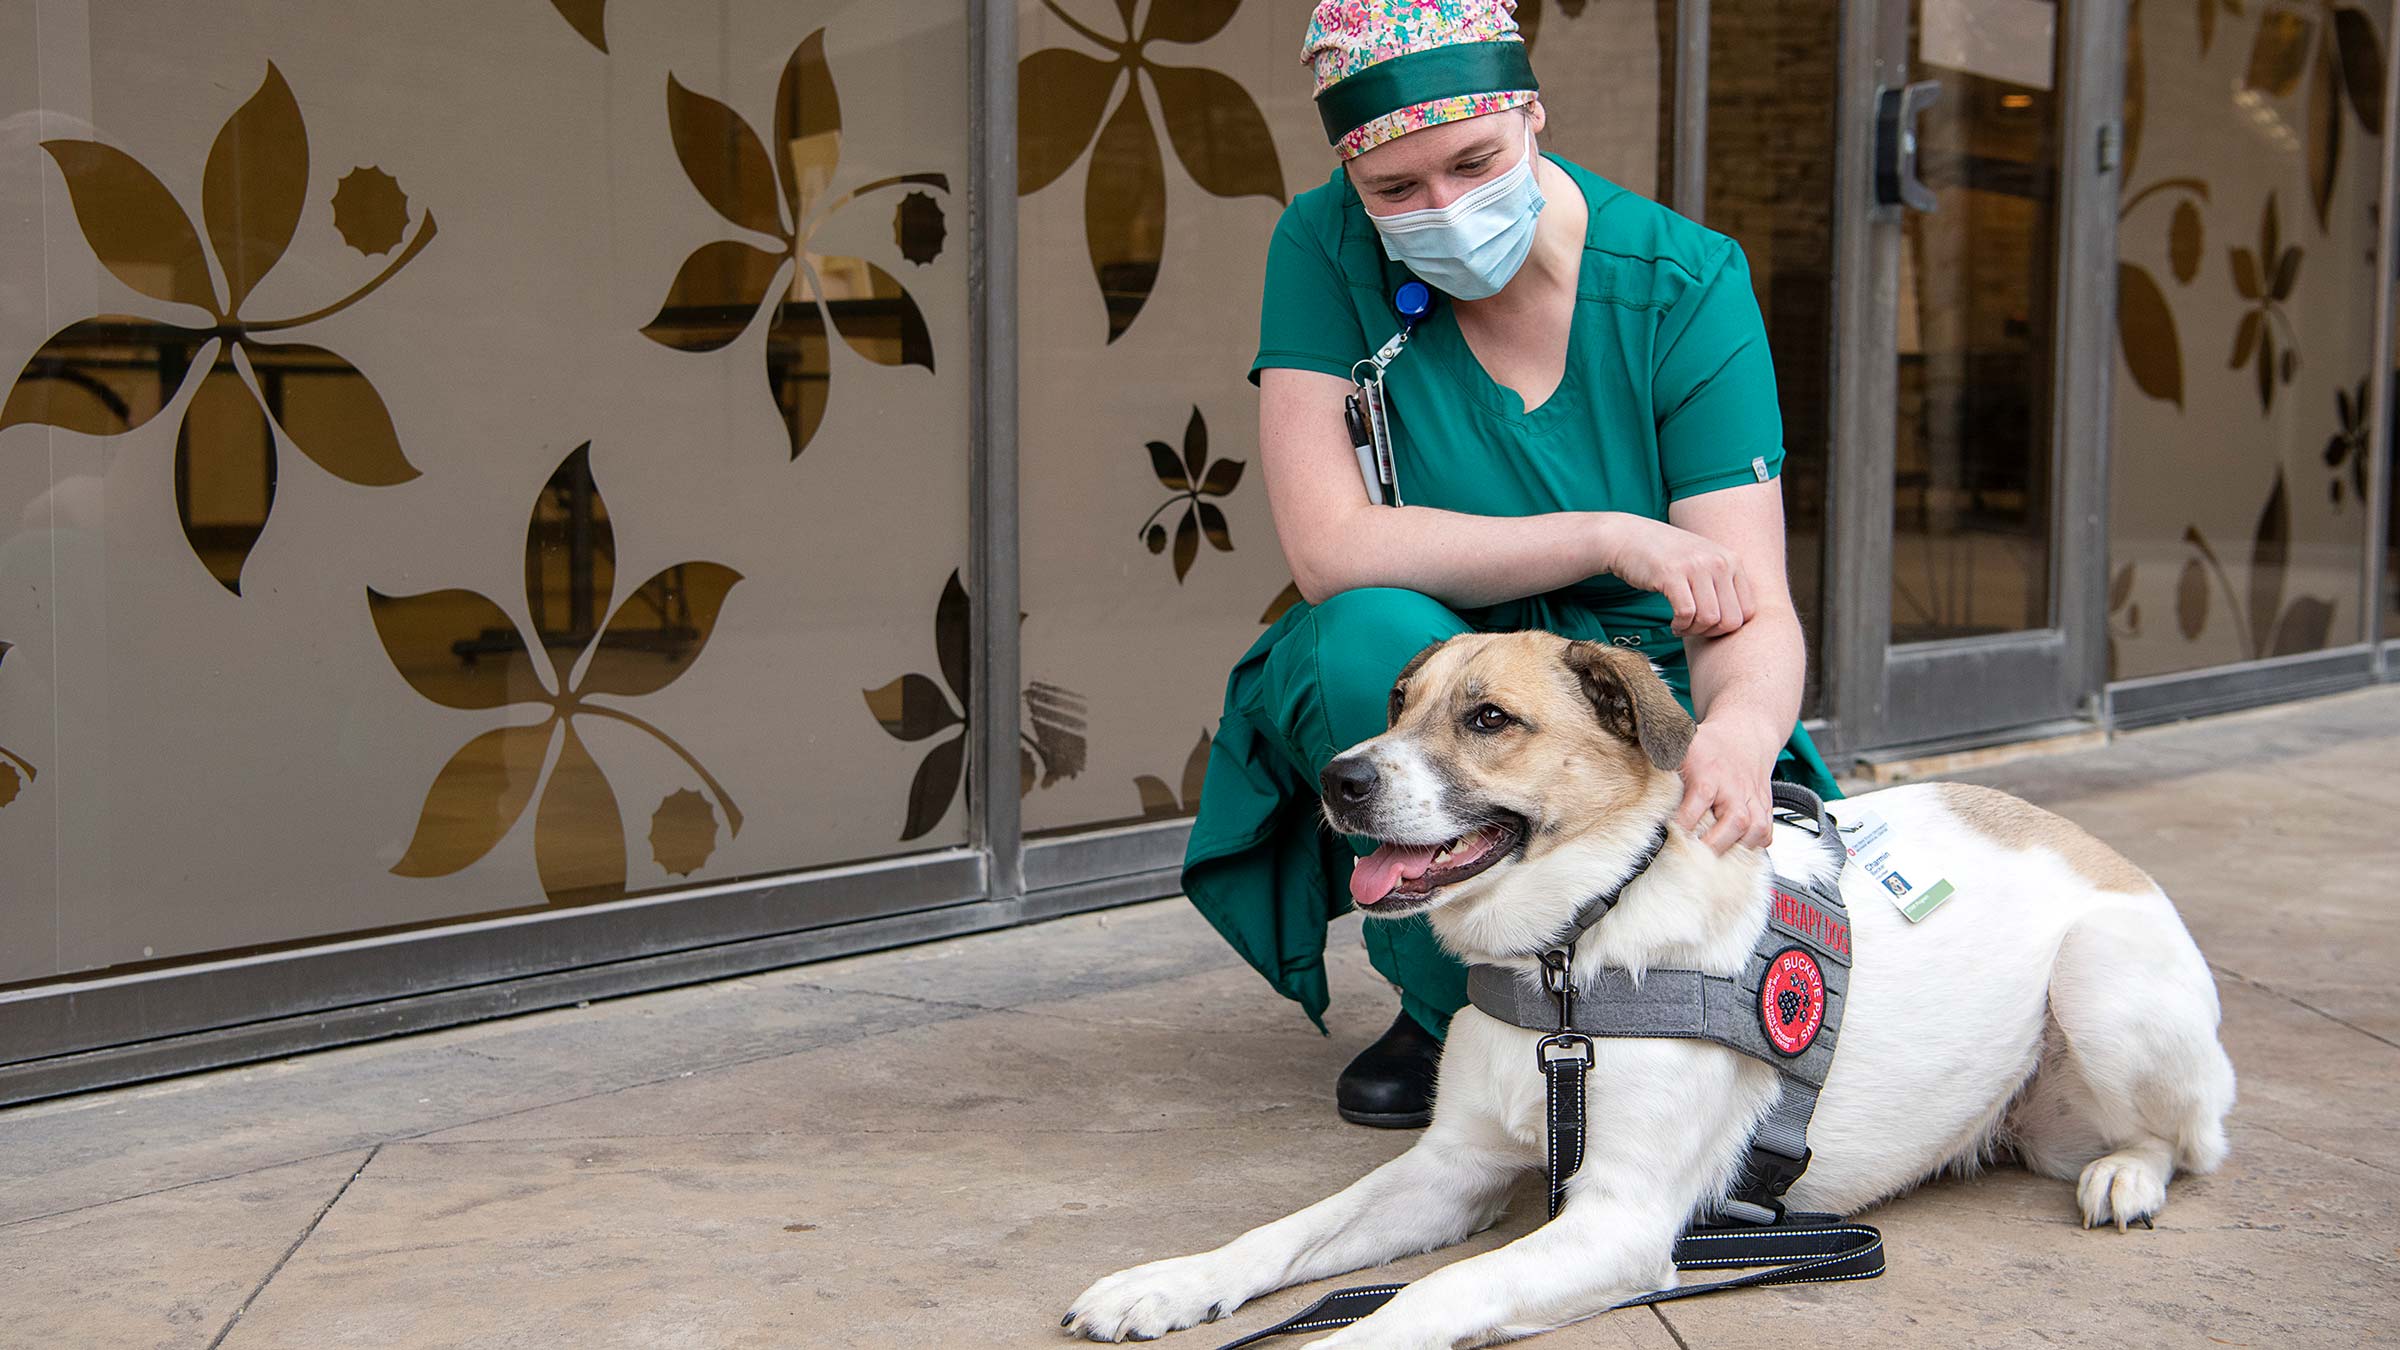 Health care worker wearing PPE smiling and petting a Buckeye Paws therapy dog